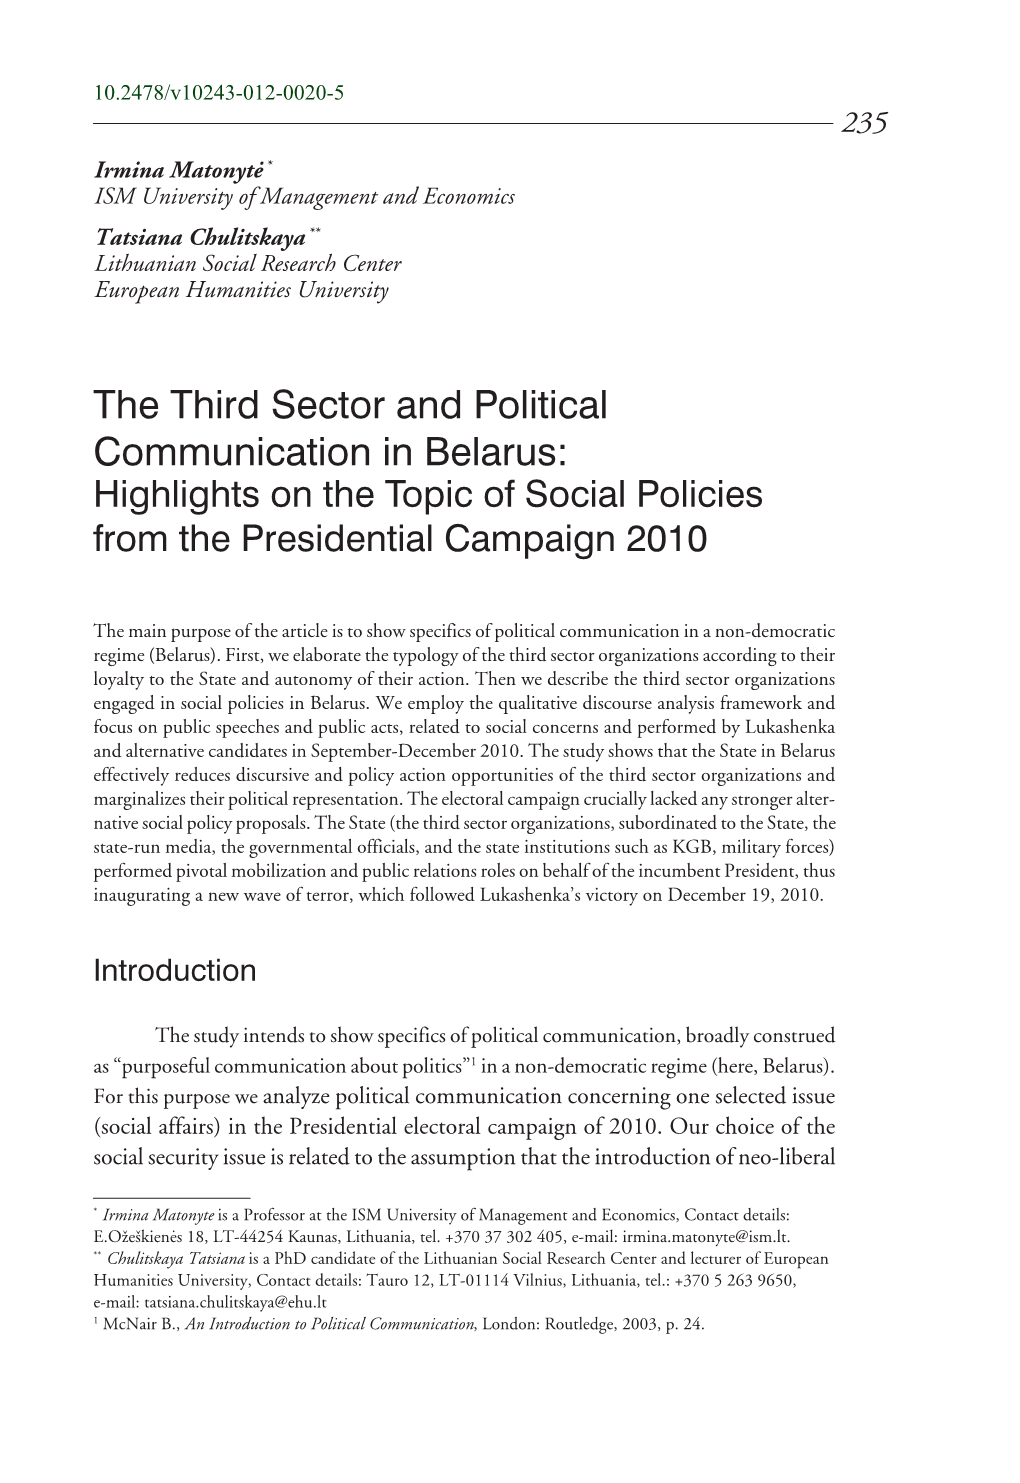 The Third Sector and Political Communication in Belarus: Highlights on the Topic of Social Policies from the Presidential Campaign 2010